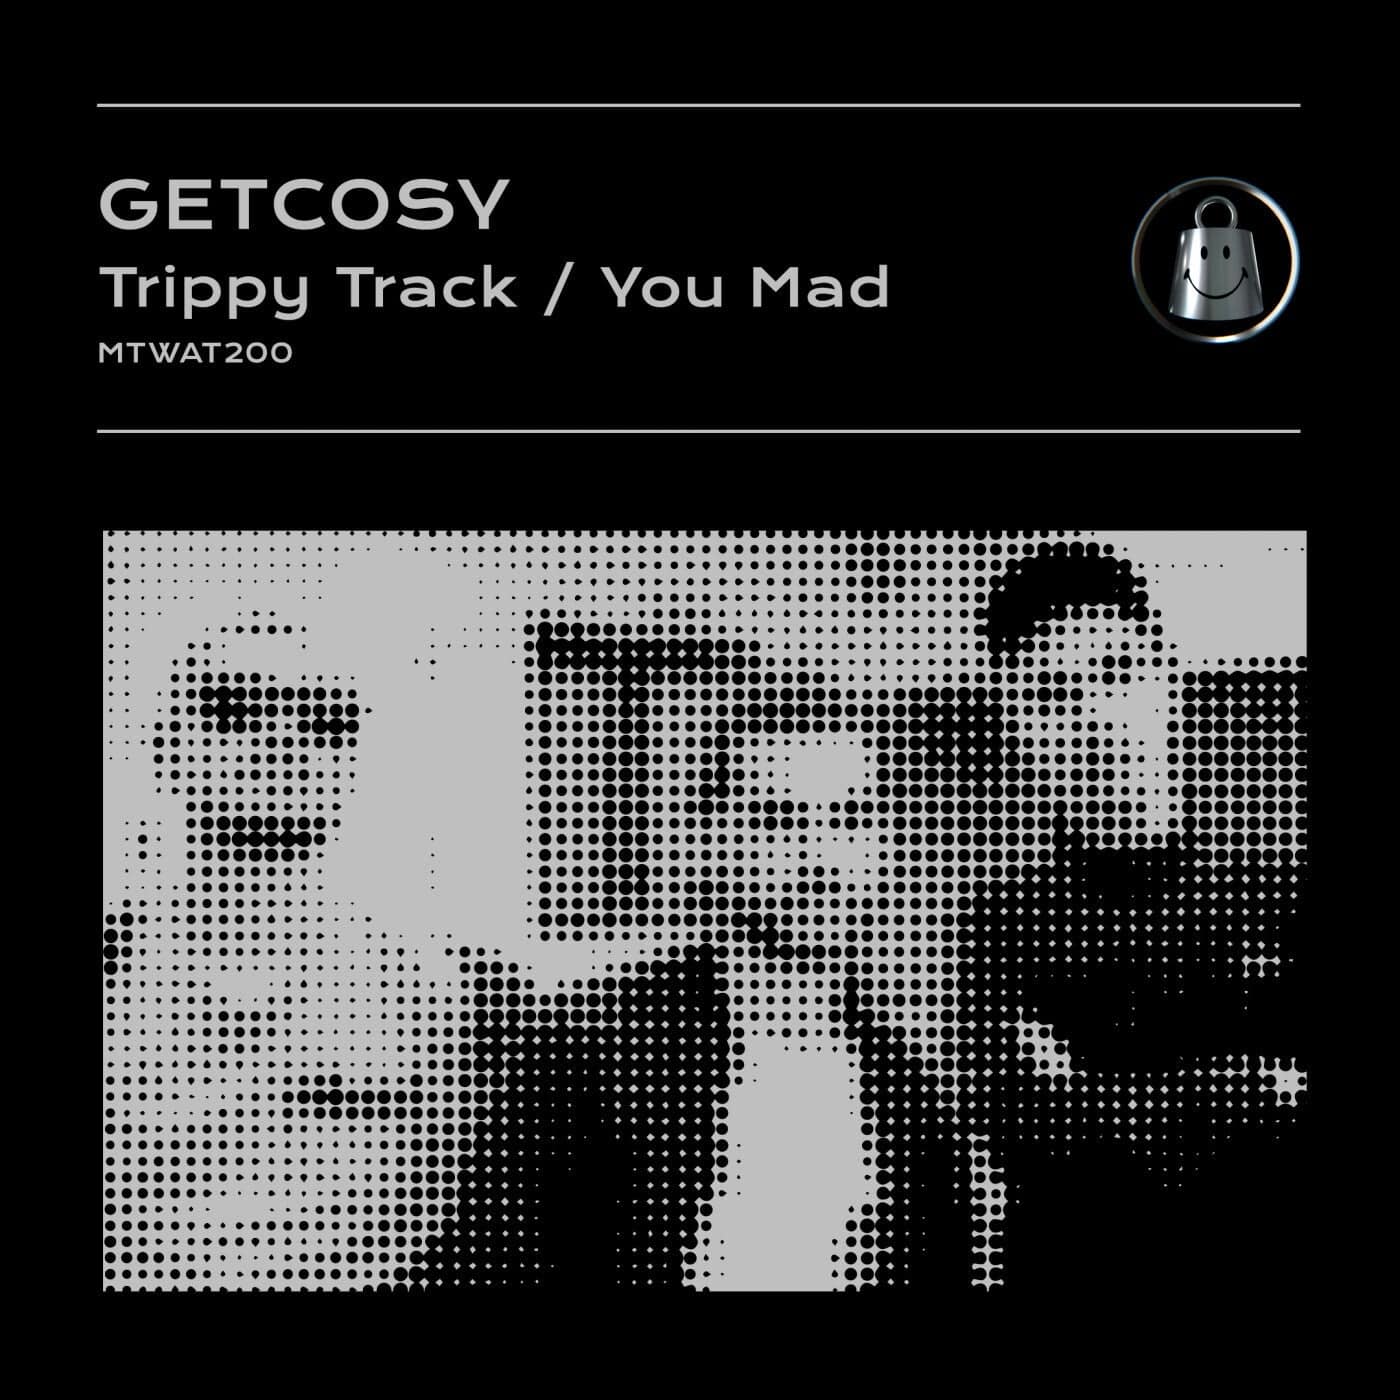 image cover: GetCosy - Trippy Track / You Mad / MTWAT200